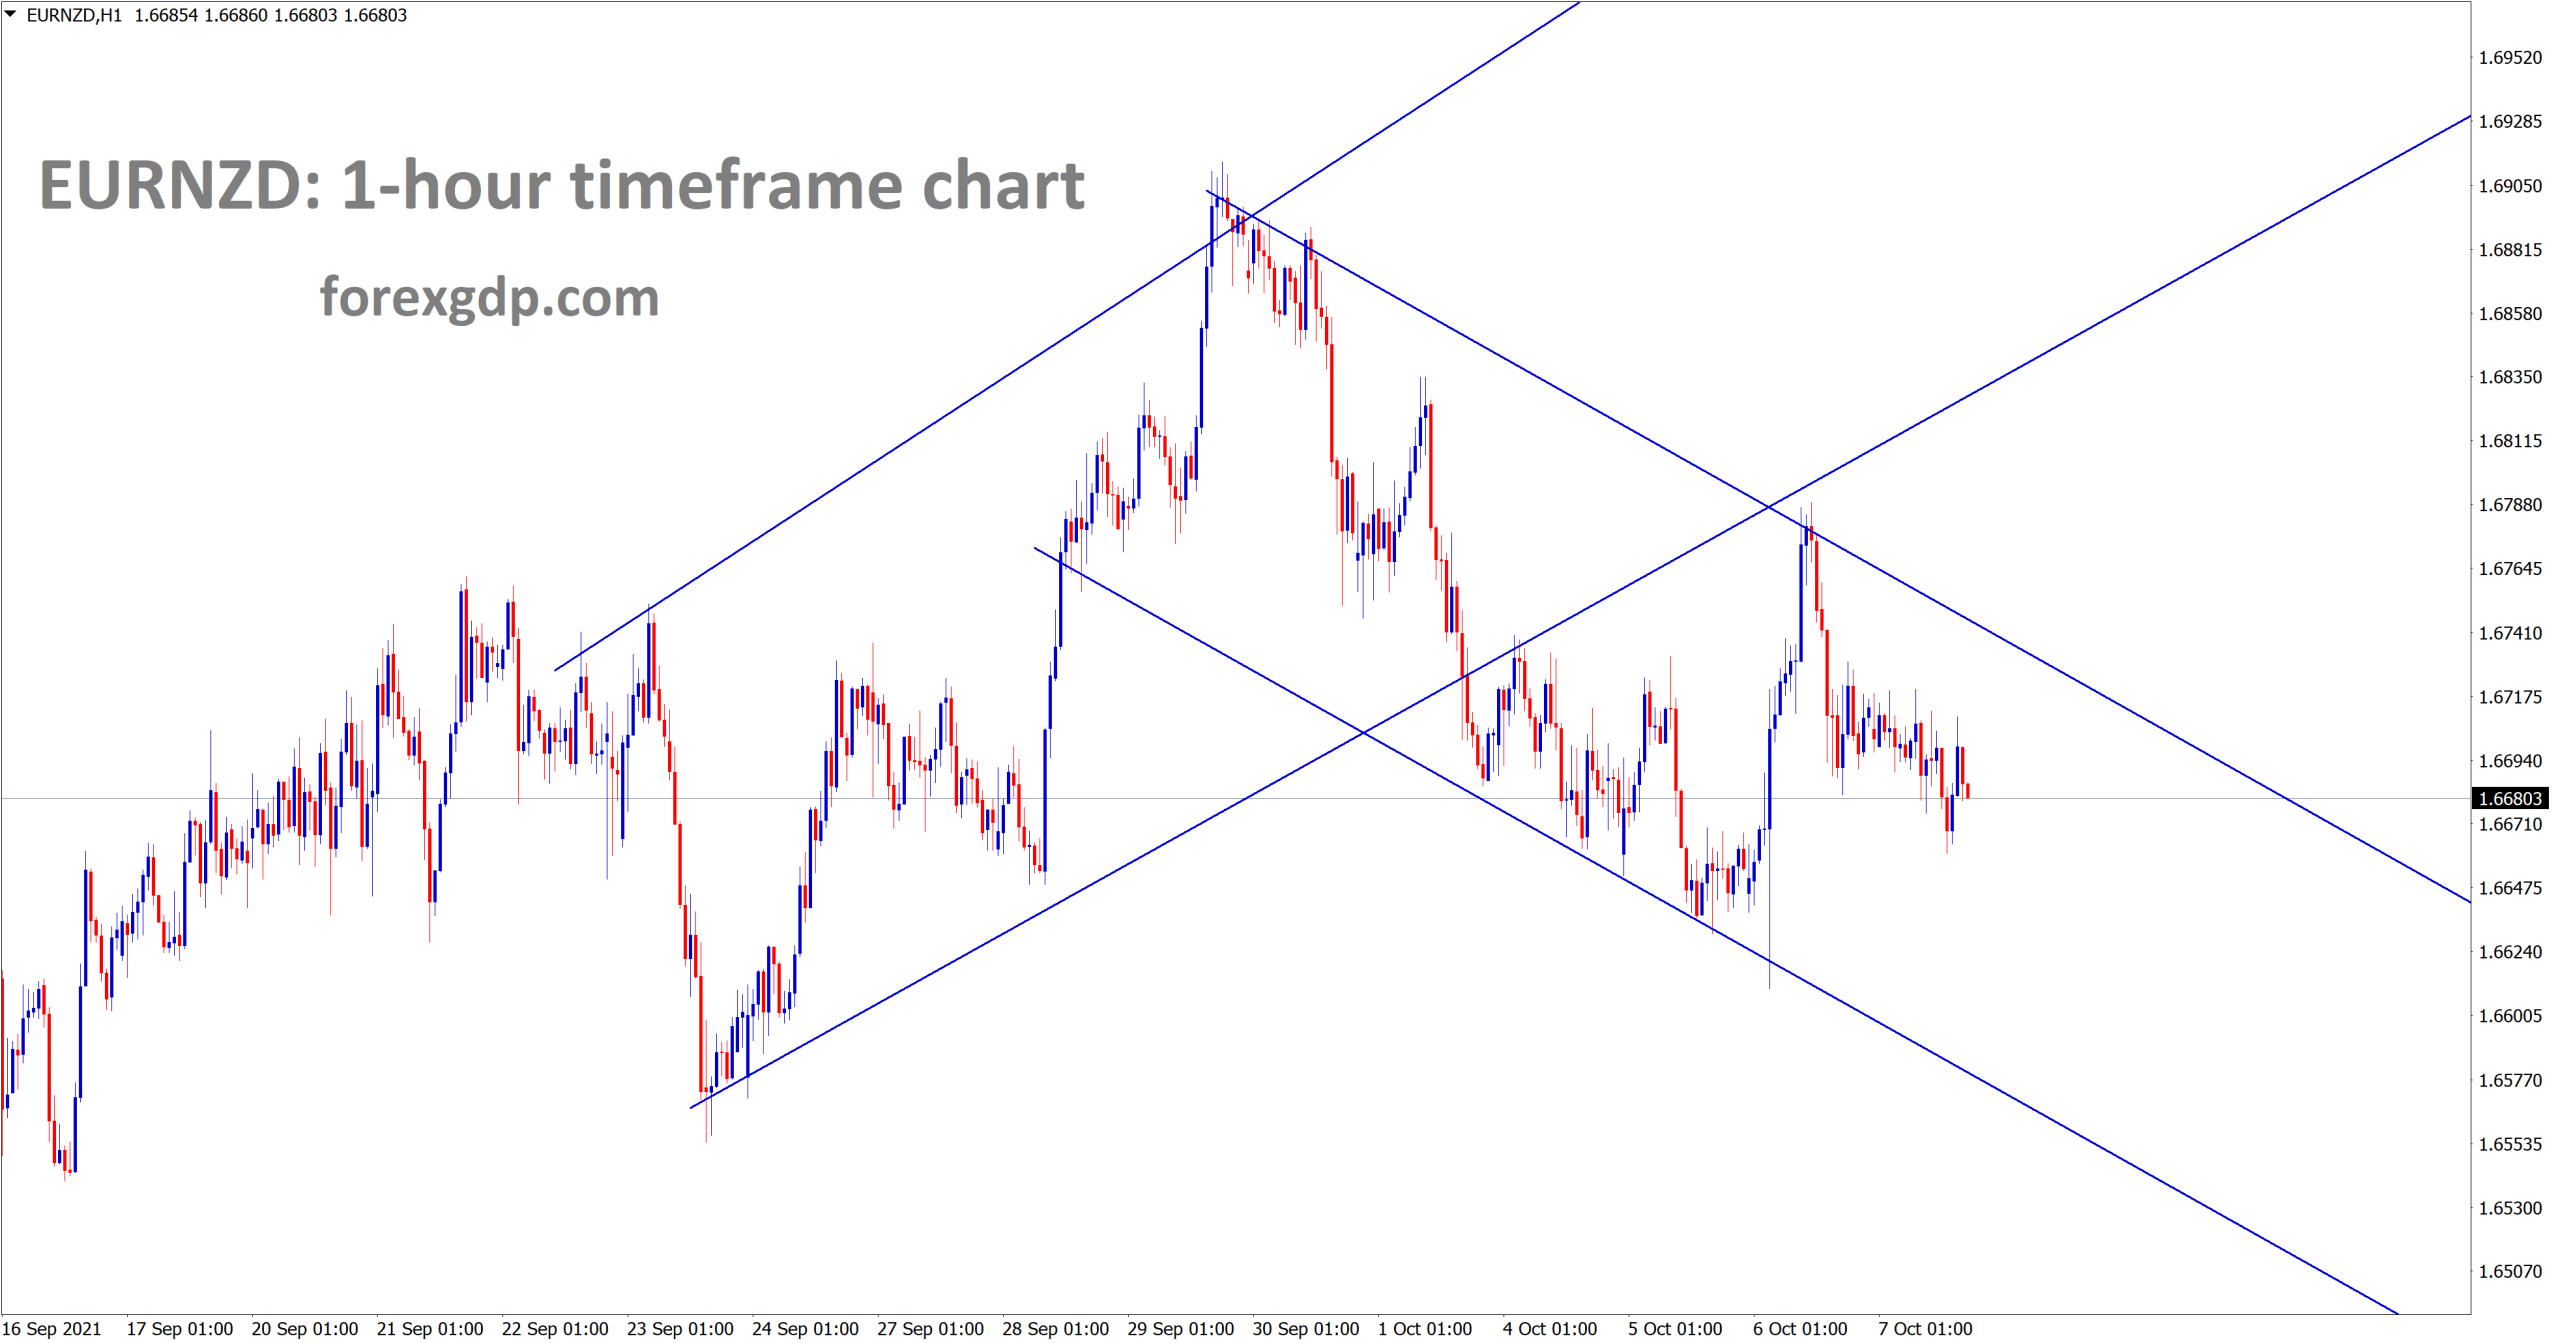 EURNZD is moving in a descenidng channel now after retesting the previous broken ascending channel